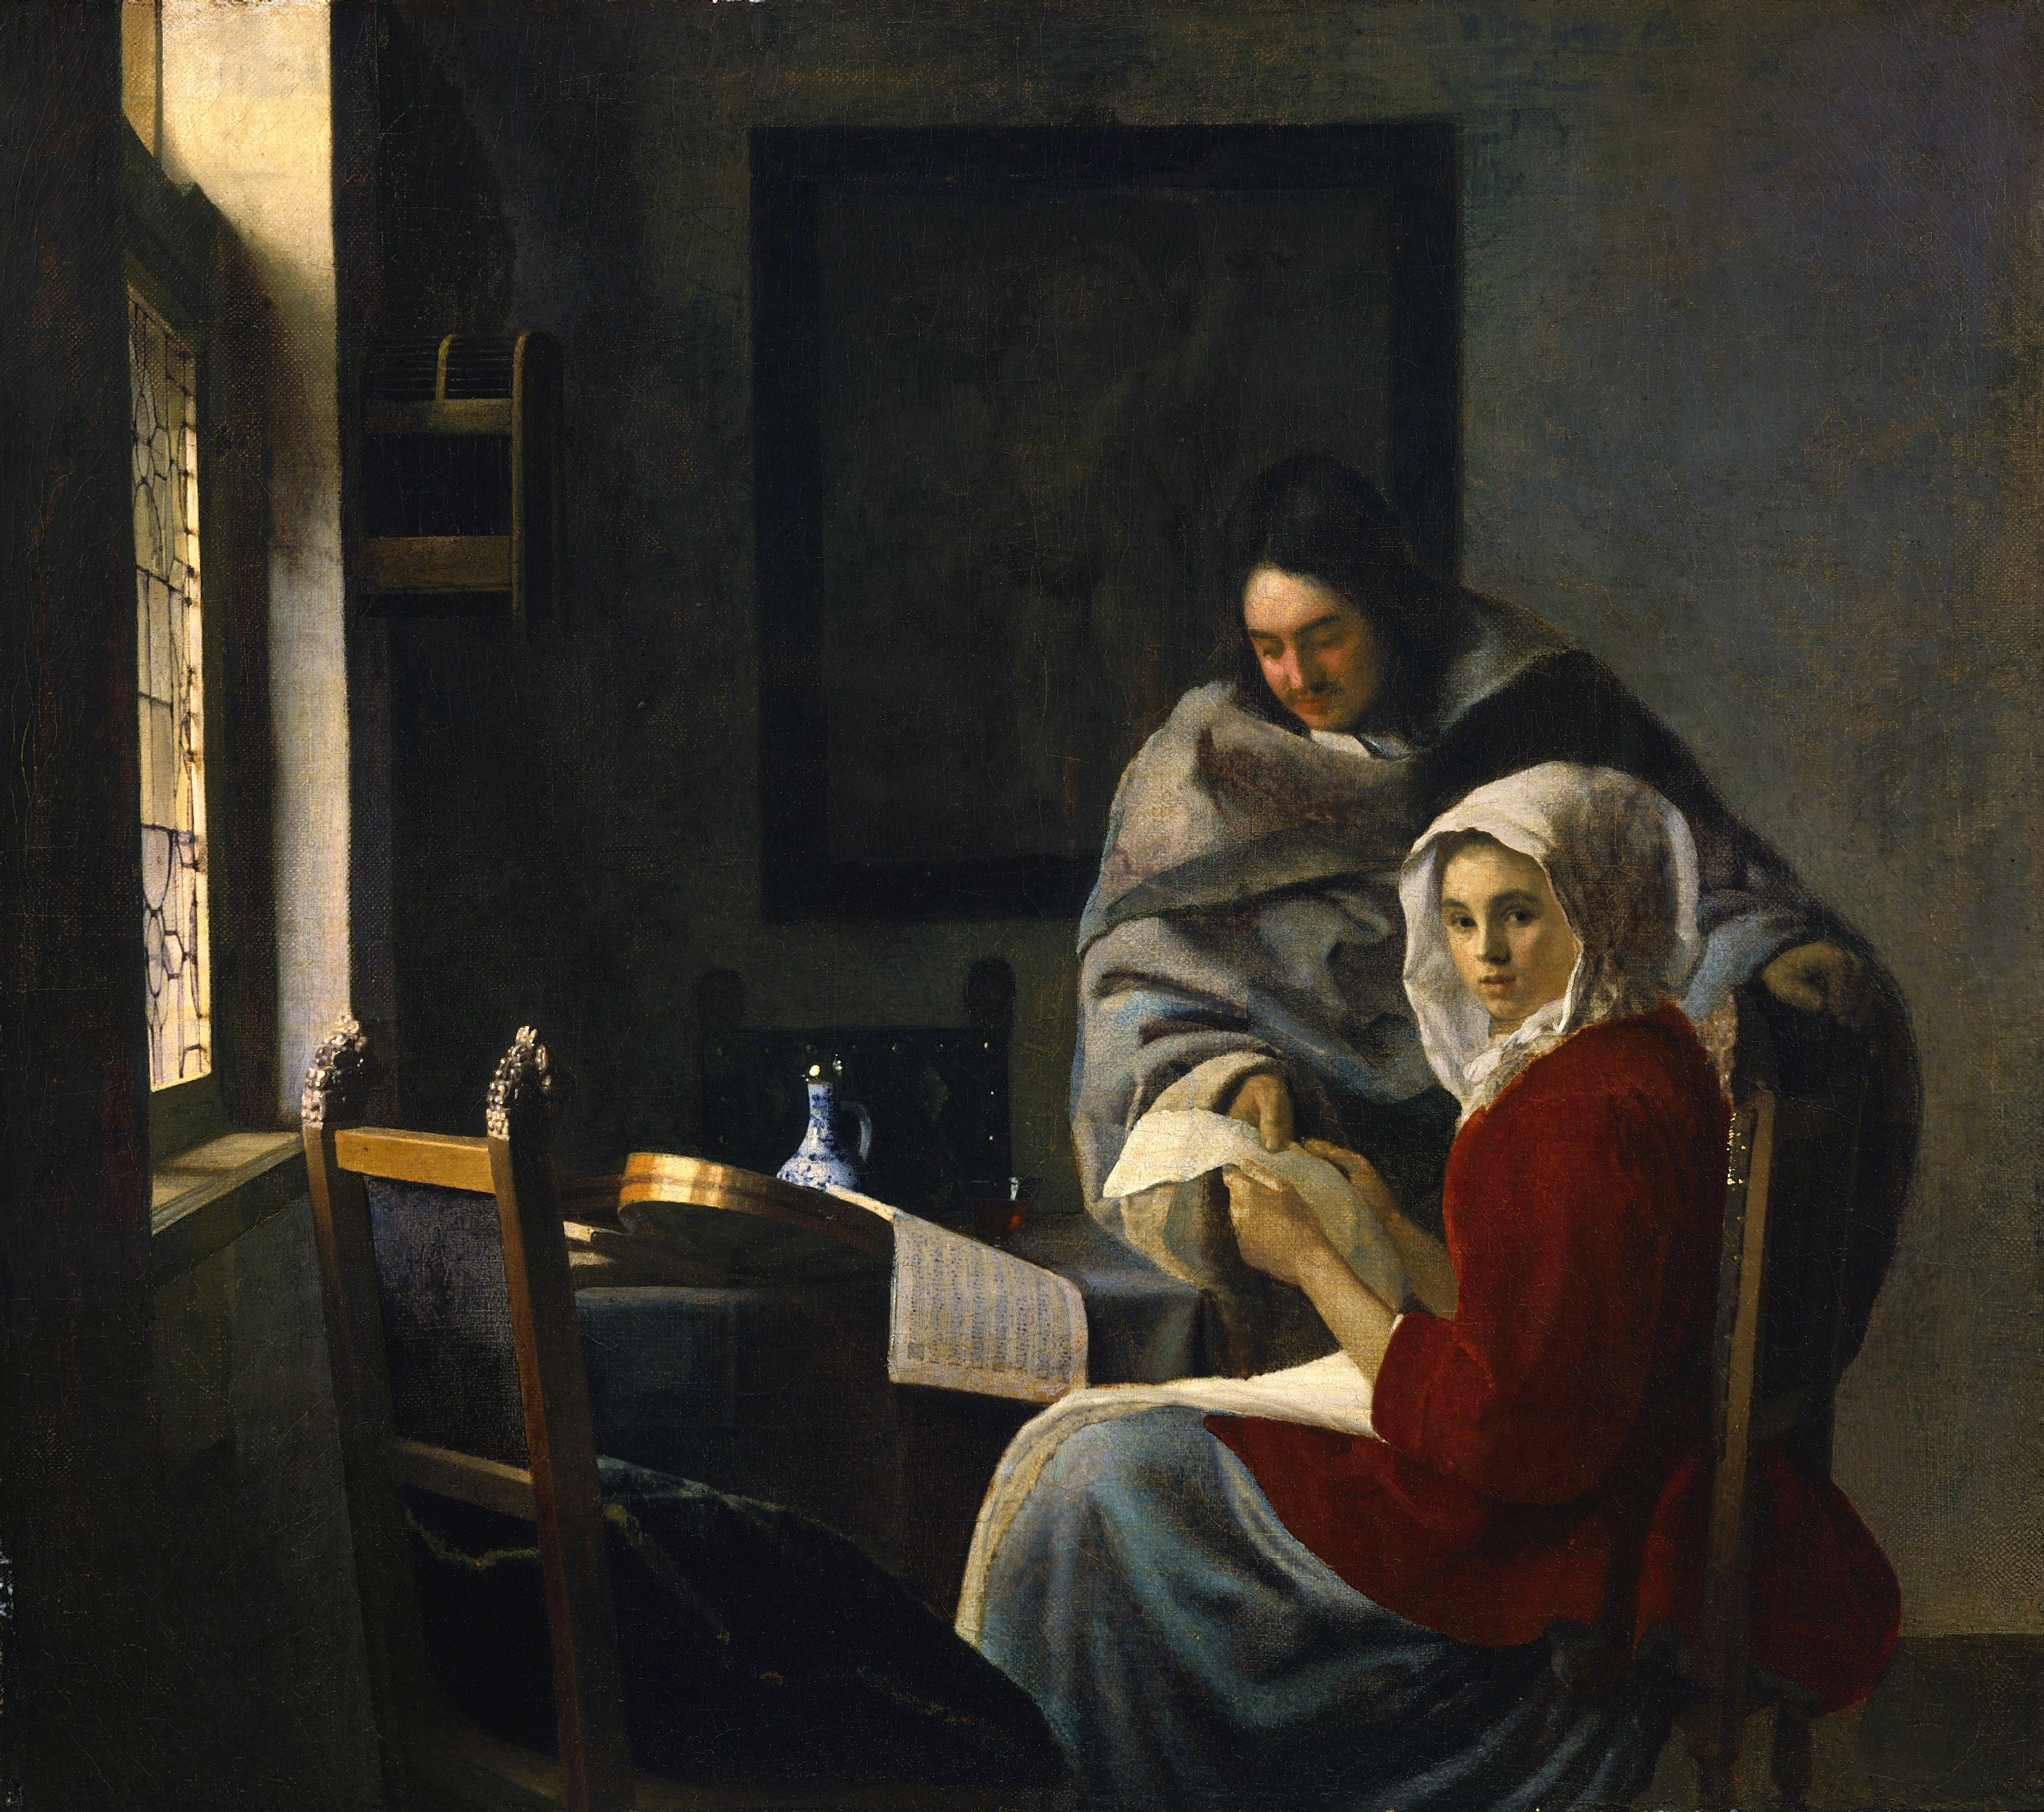 Girl Interrupted at Her Music by Johannes Vermeer - ca. 1658–59 - 39.4 x 44.5 cm The Frick Collection